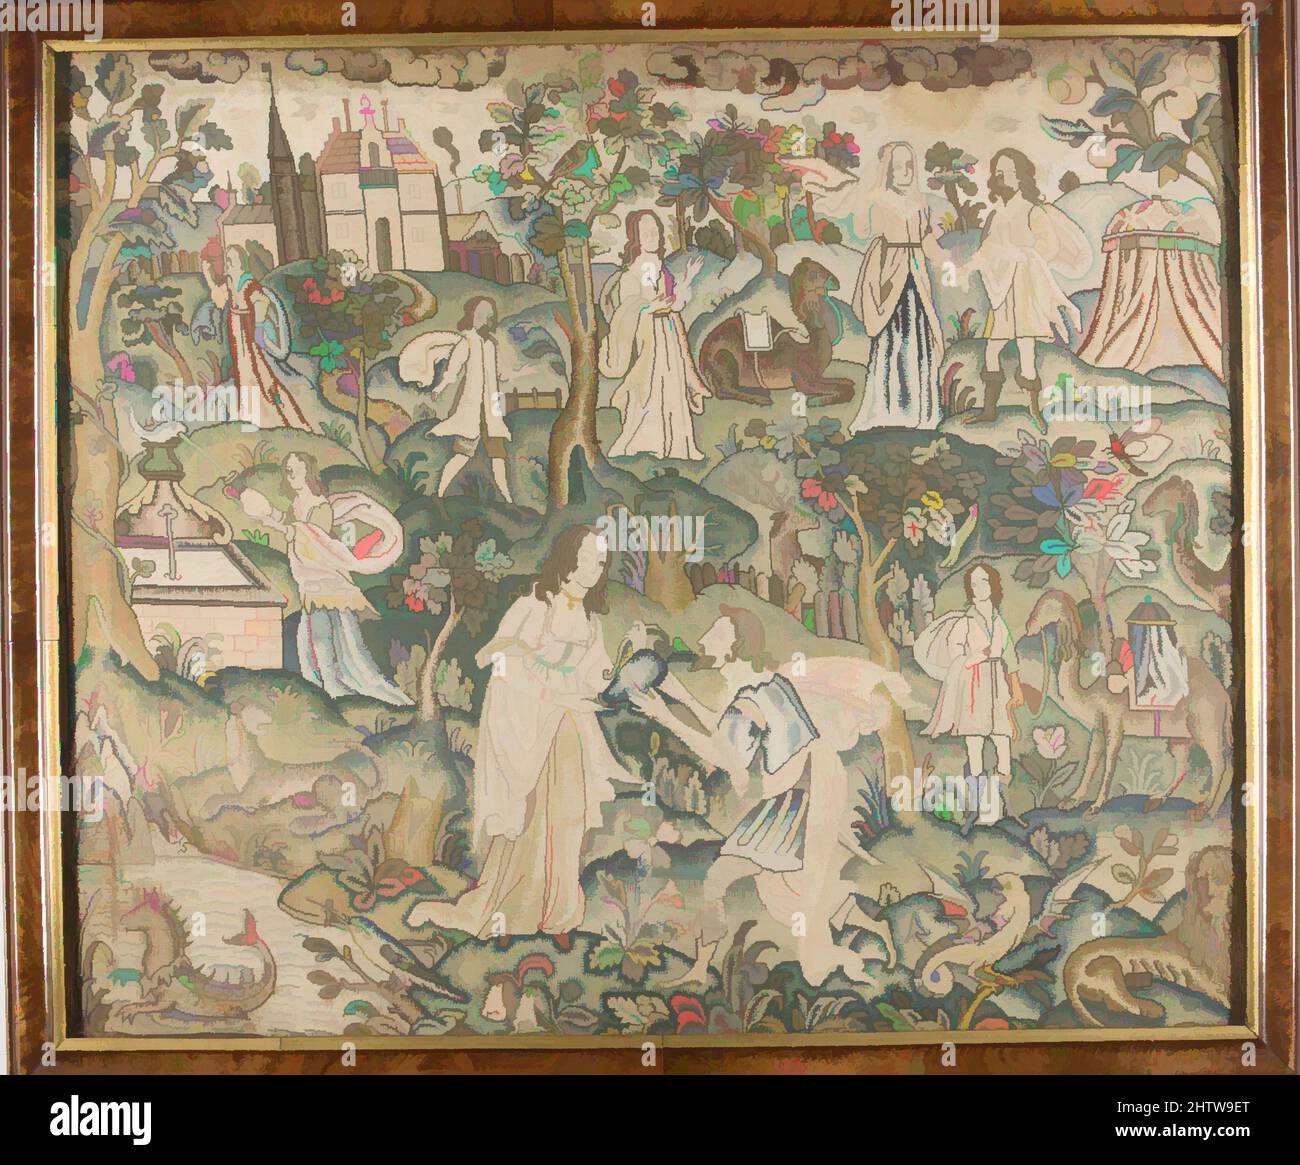 Art inspired by Eliezer and Rebecca, mid-17th century, British, Silk on canvas, H. 17 1/4 x W. 20 3/4 inches (43.8 x 52.7 cm); Framed: H. 19 1/2 x W. 23 1/4 x D. 1 1/4 inches (49.5 x 59.1 x 3.2 cm), Textiles-Embroidered, Classic works modernized by Artotop with a splash of modernity. Shapes, color and value, eye-catching visual impact on art. Emotions through freedom of artworks in a contemporary way. A timeless message pursuing a wildly creative new direction. Artists turning to the digital medium and creating the Artotop NFT Stock Photo